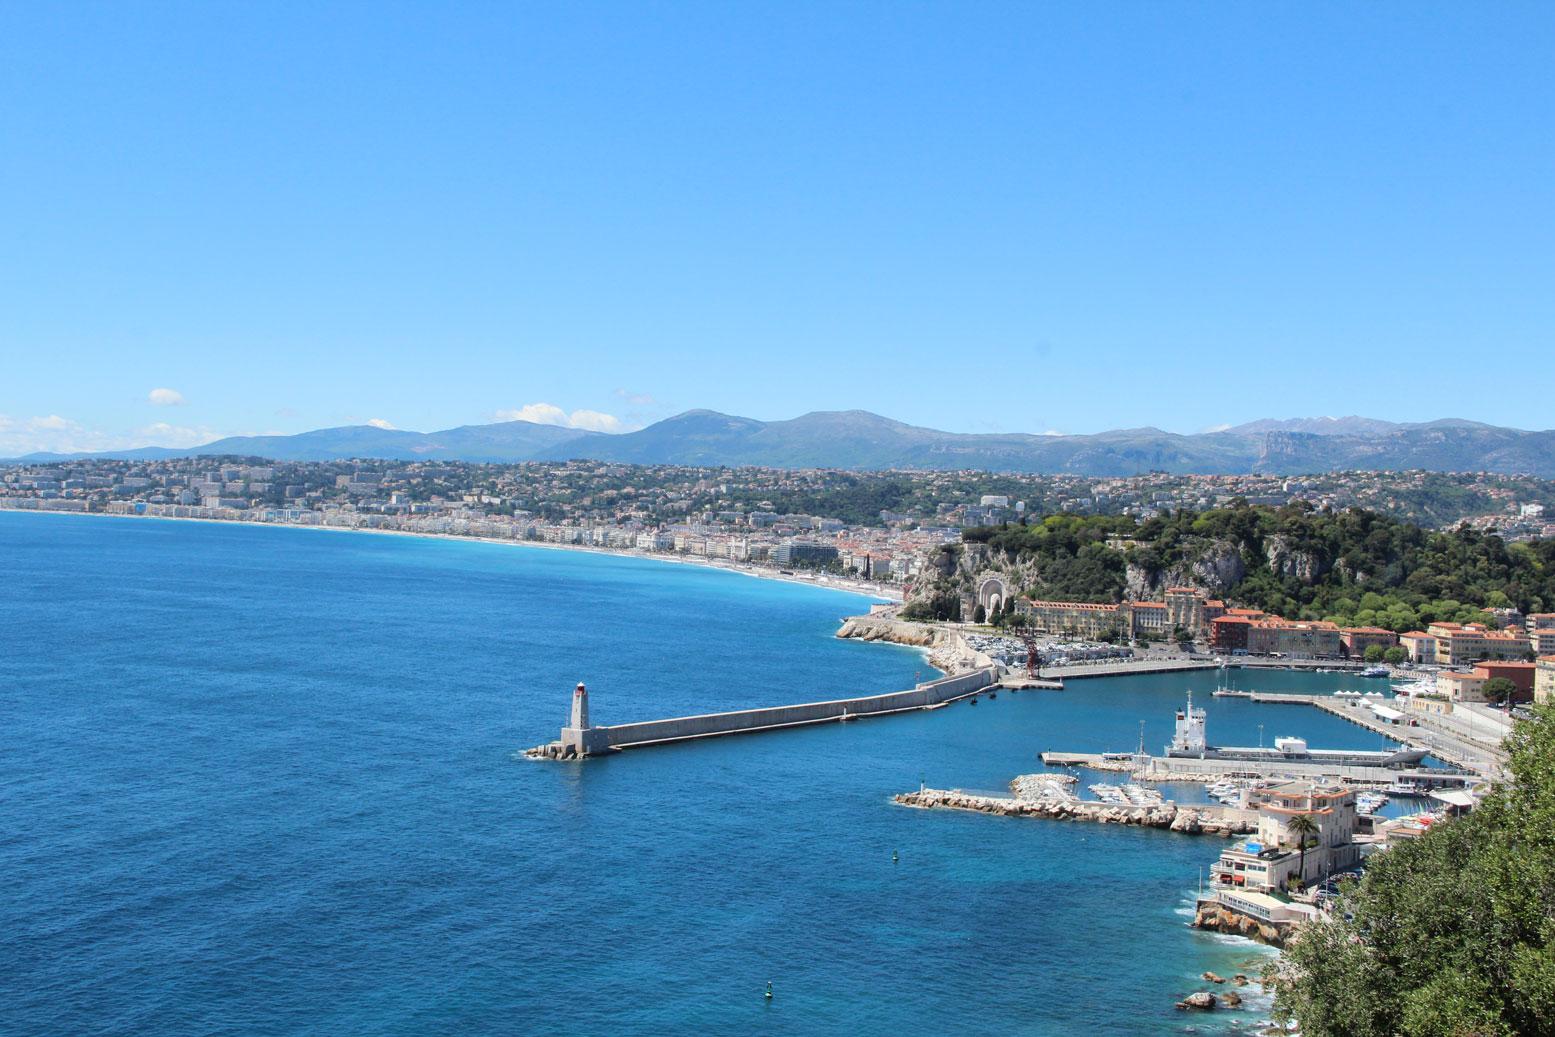 4 tips for eco friendly vacations in Nice